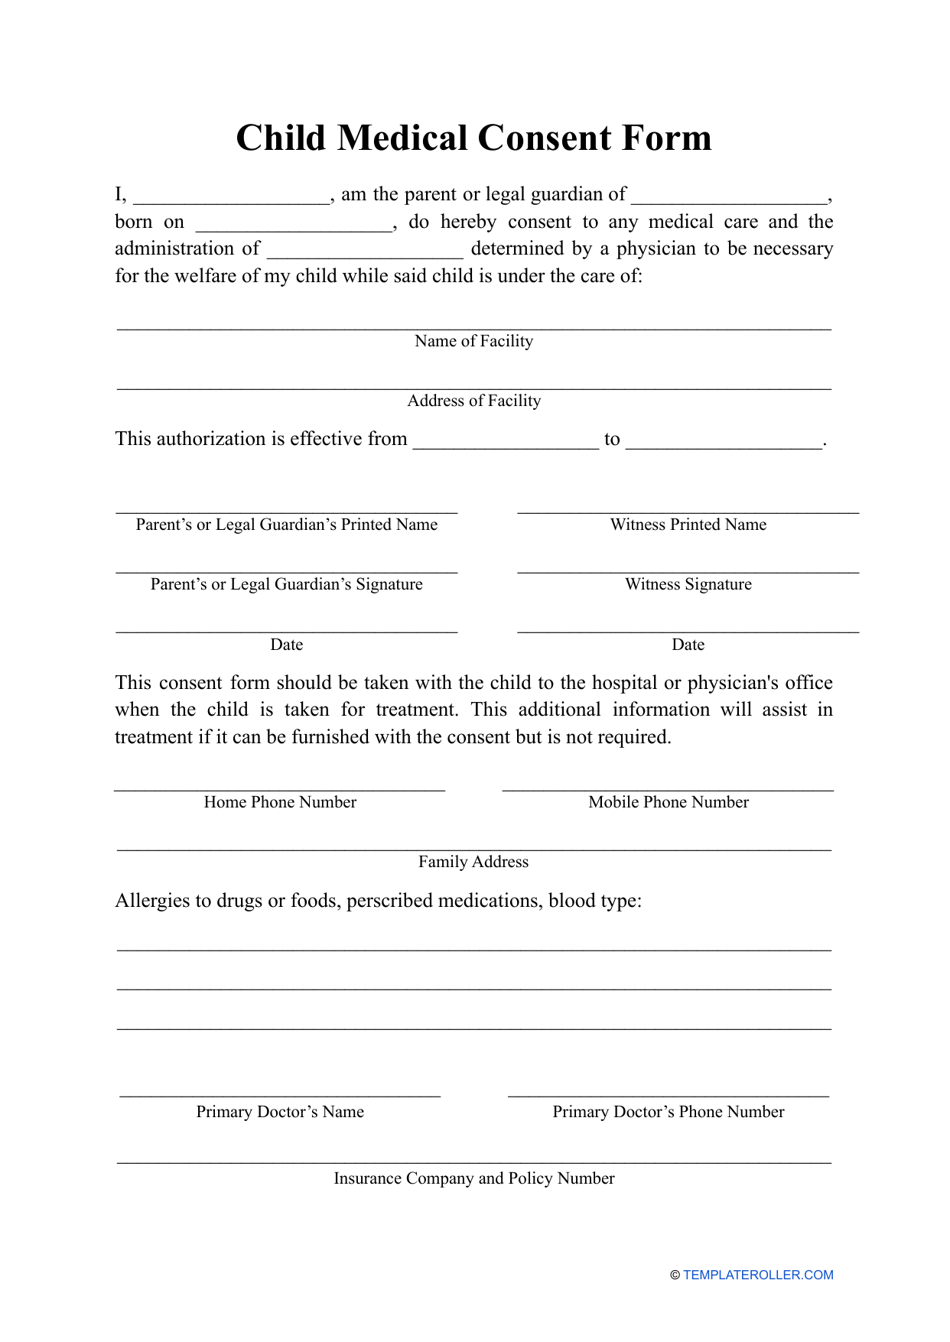 Child Medical Consent Form, Page 1